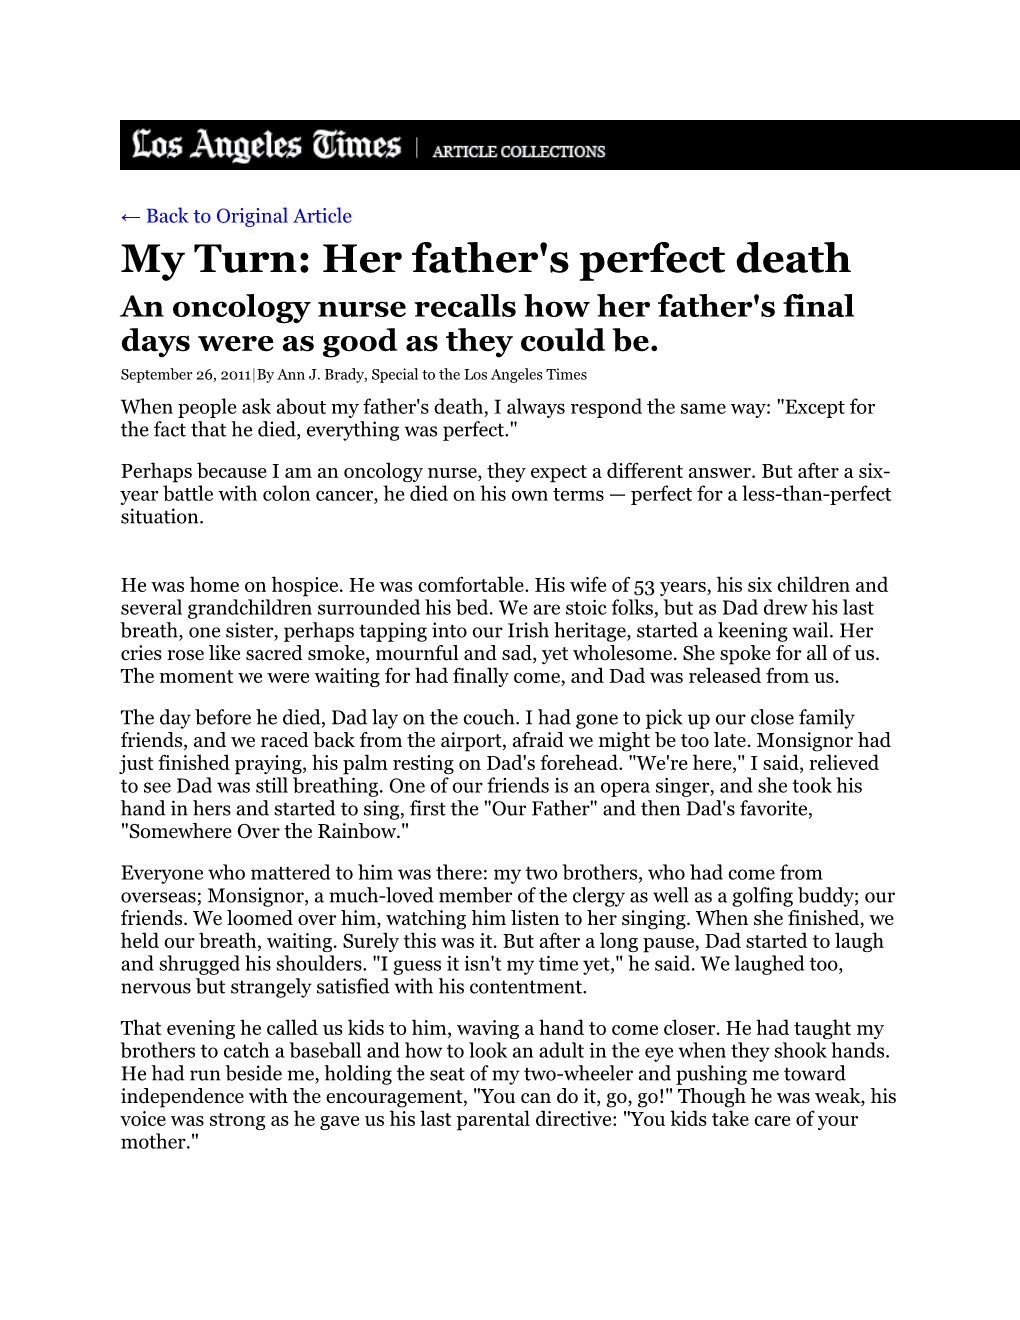 My Turn: Her Father's Perfect Death